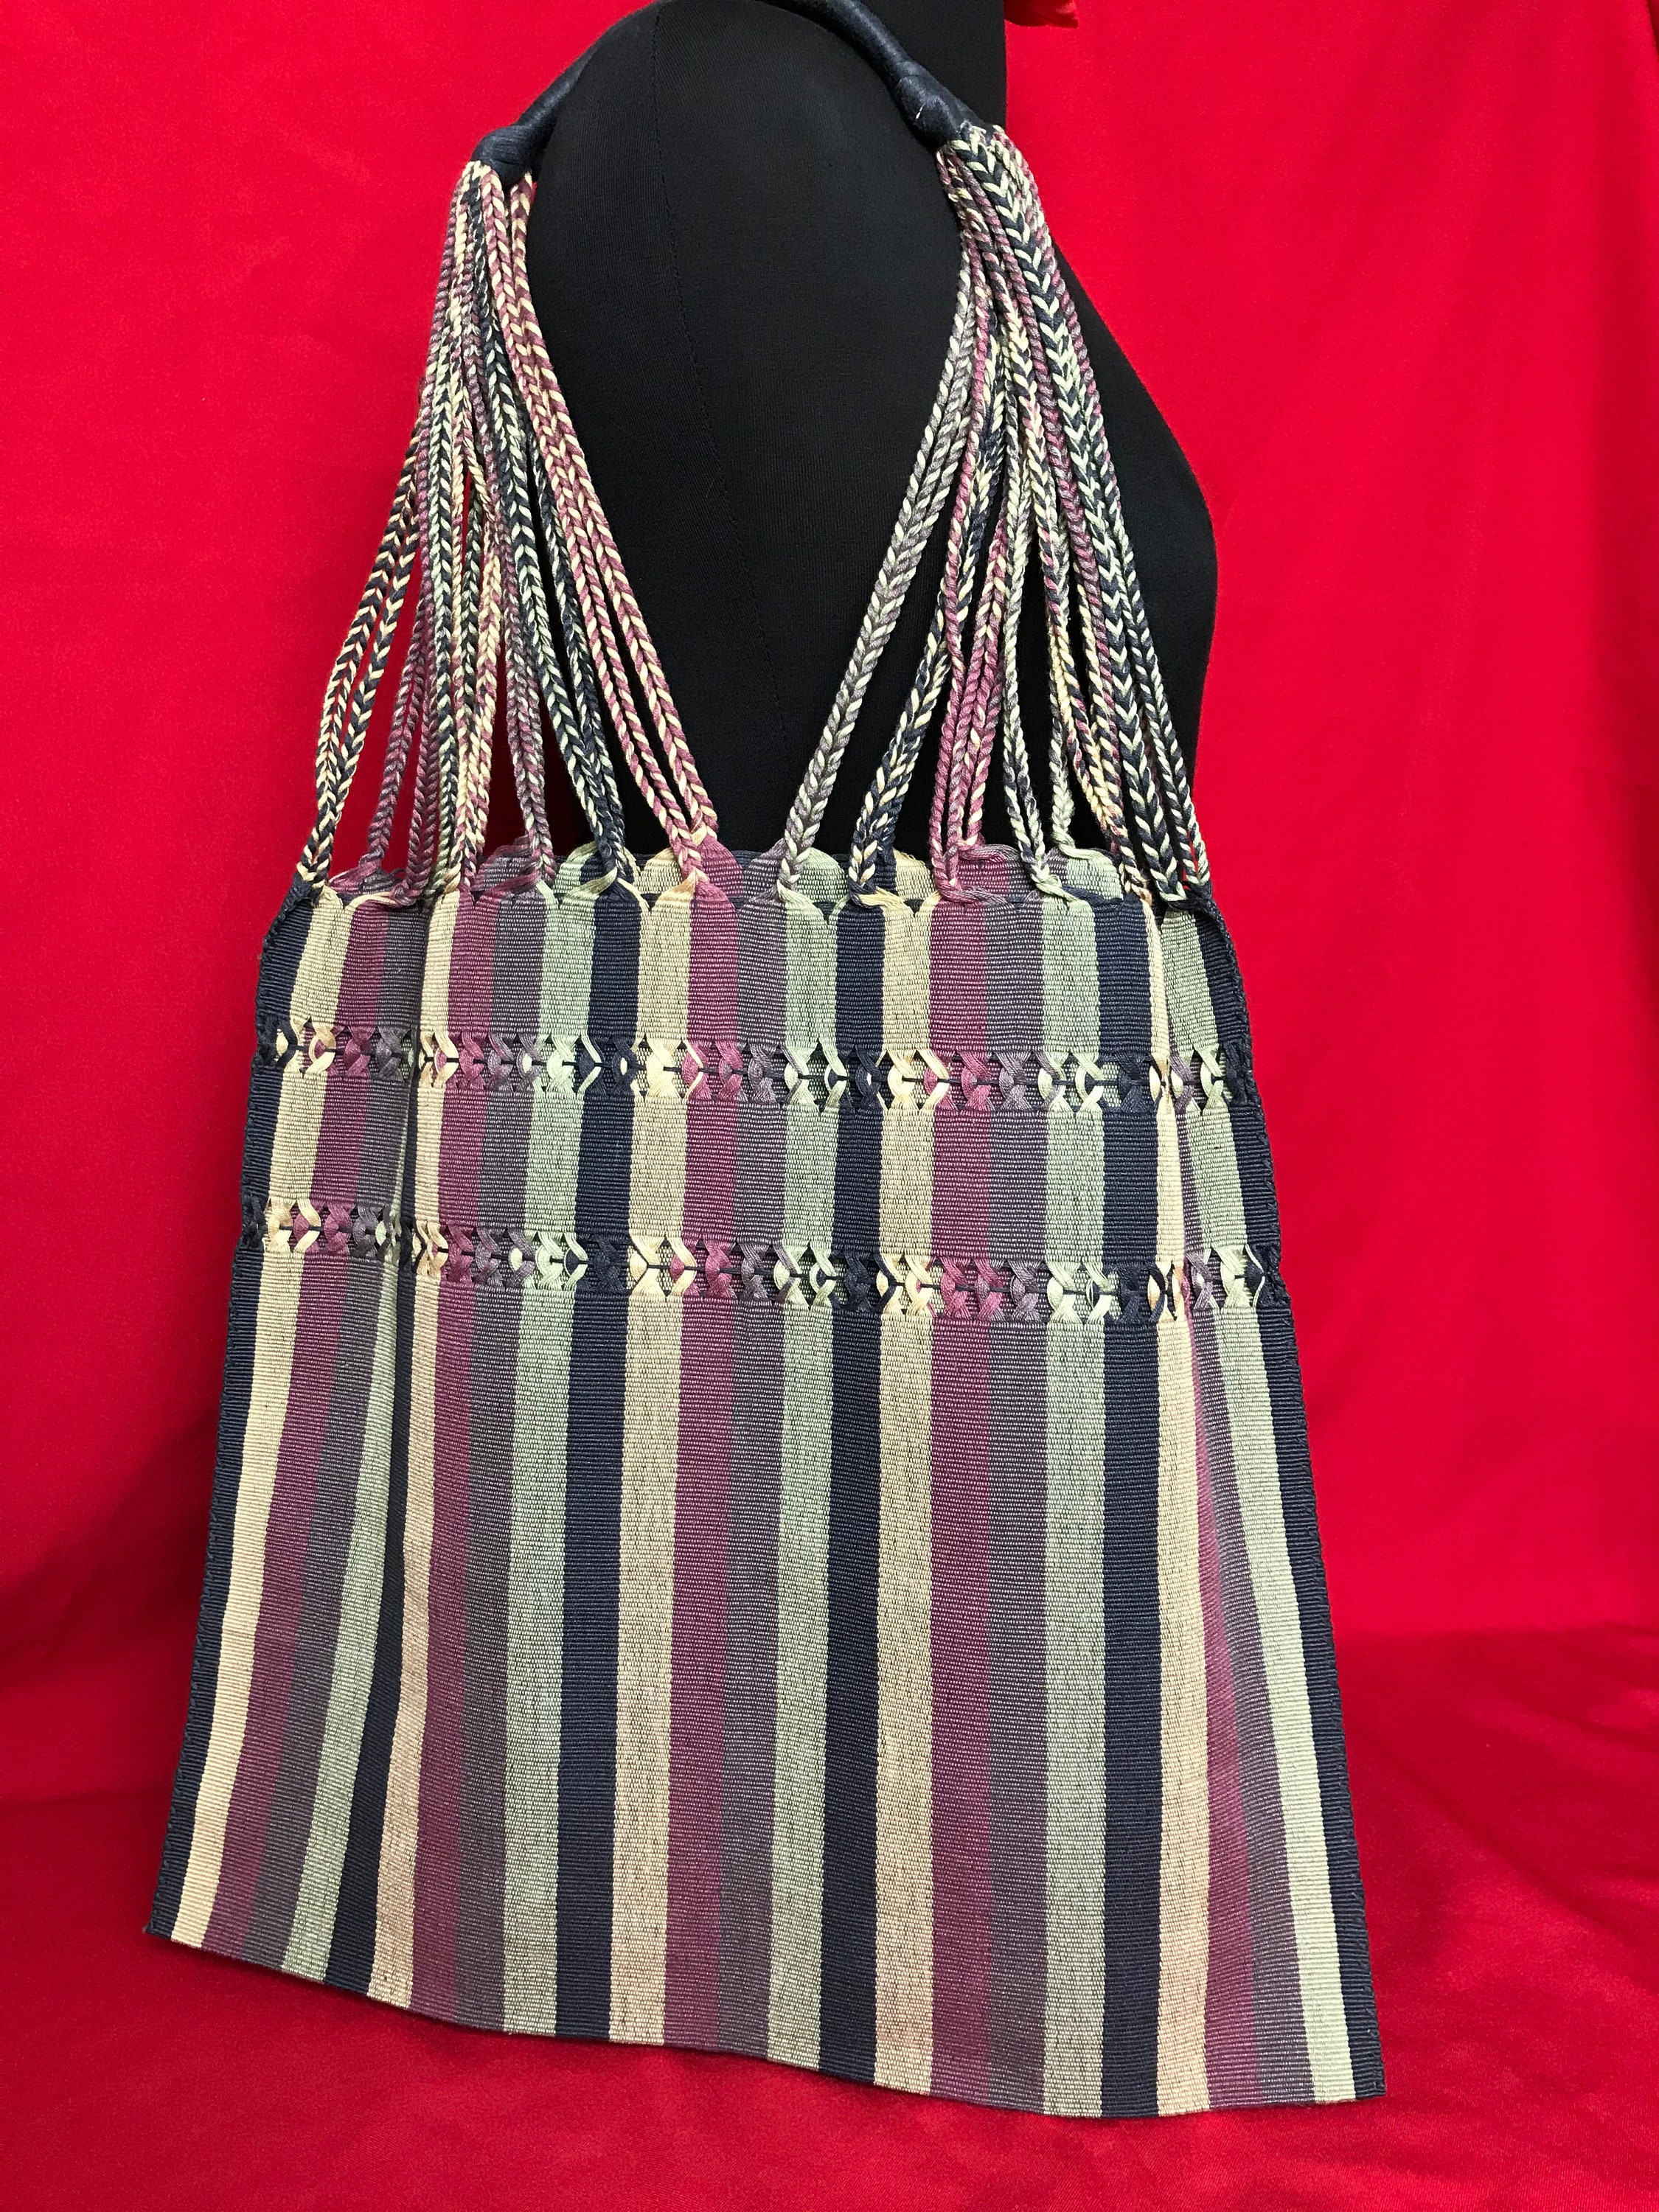 Striped Mexican Bag Handwoven Mexican Market Tote - Etsy UK